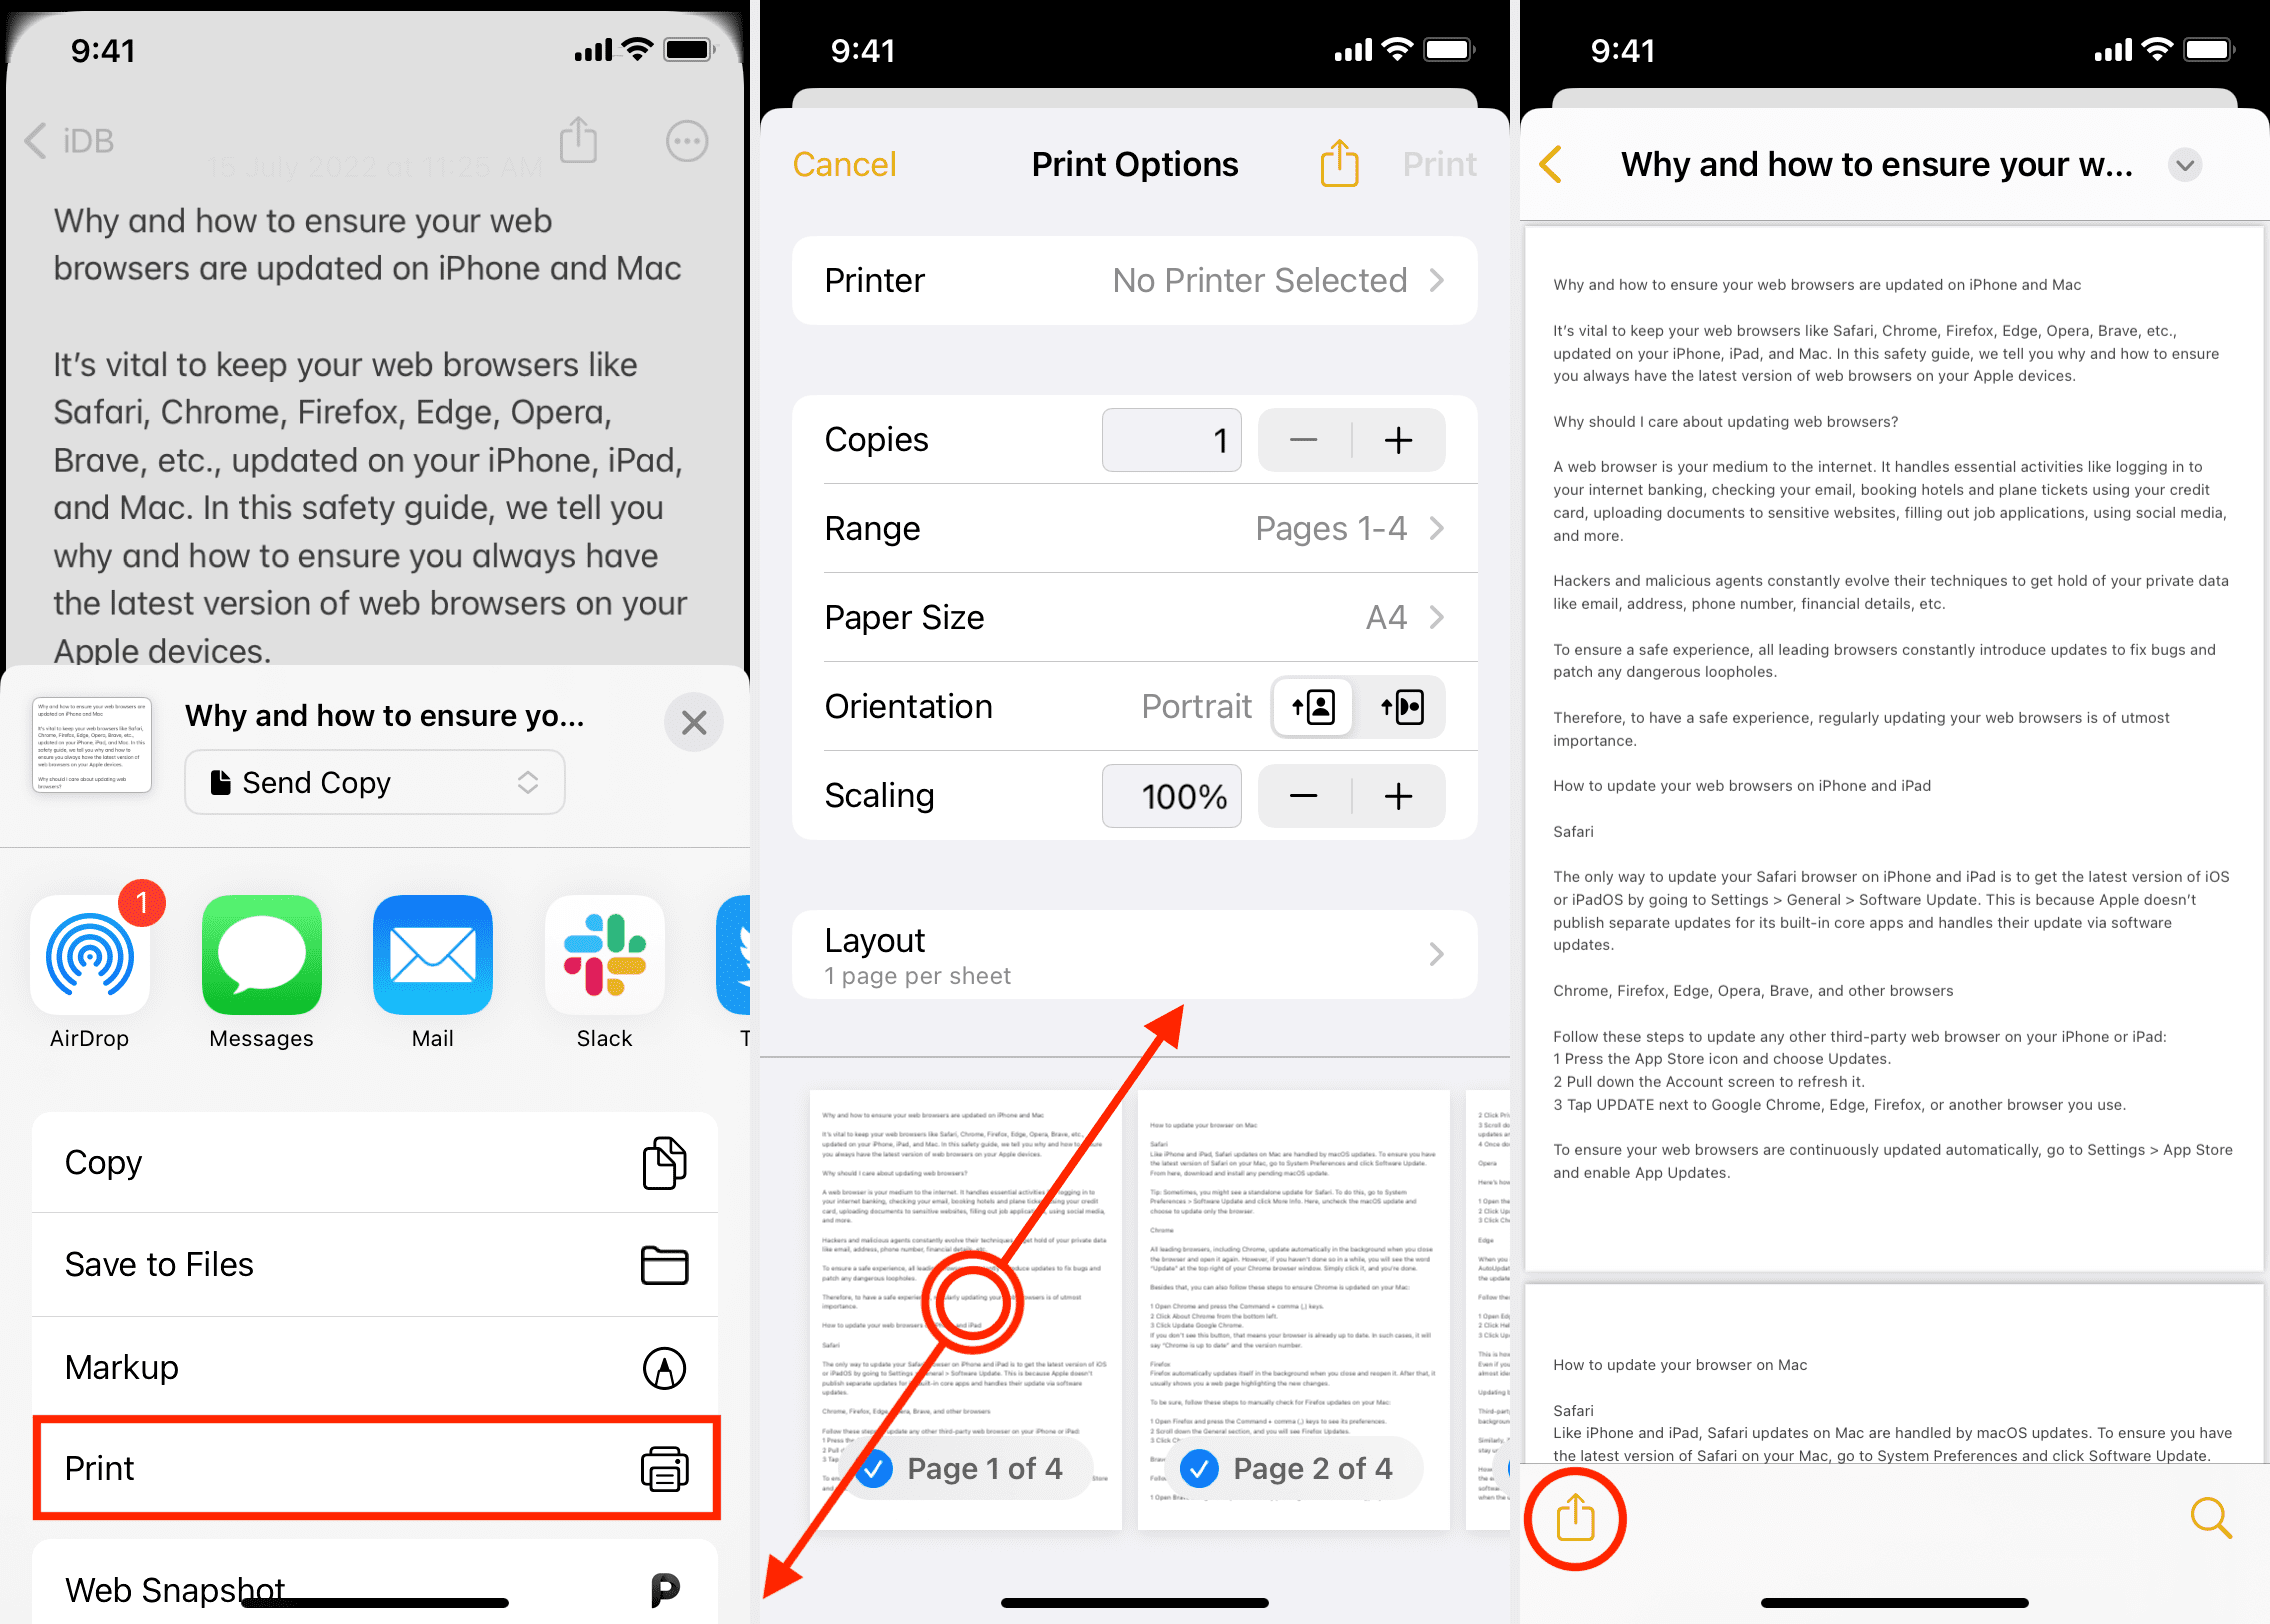 Export Apple Note as PDF using the print option